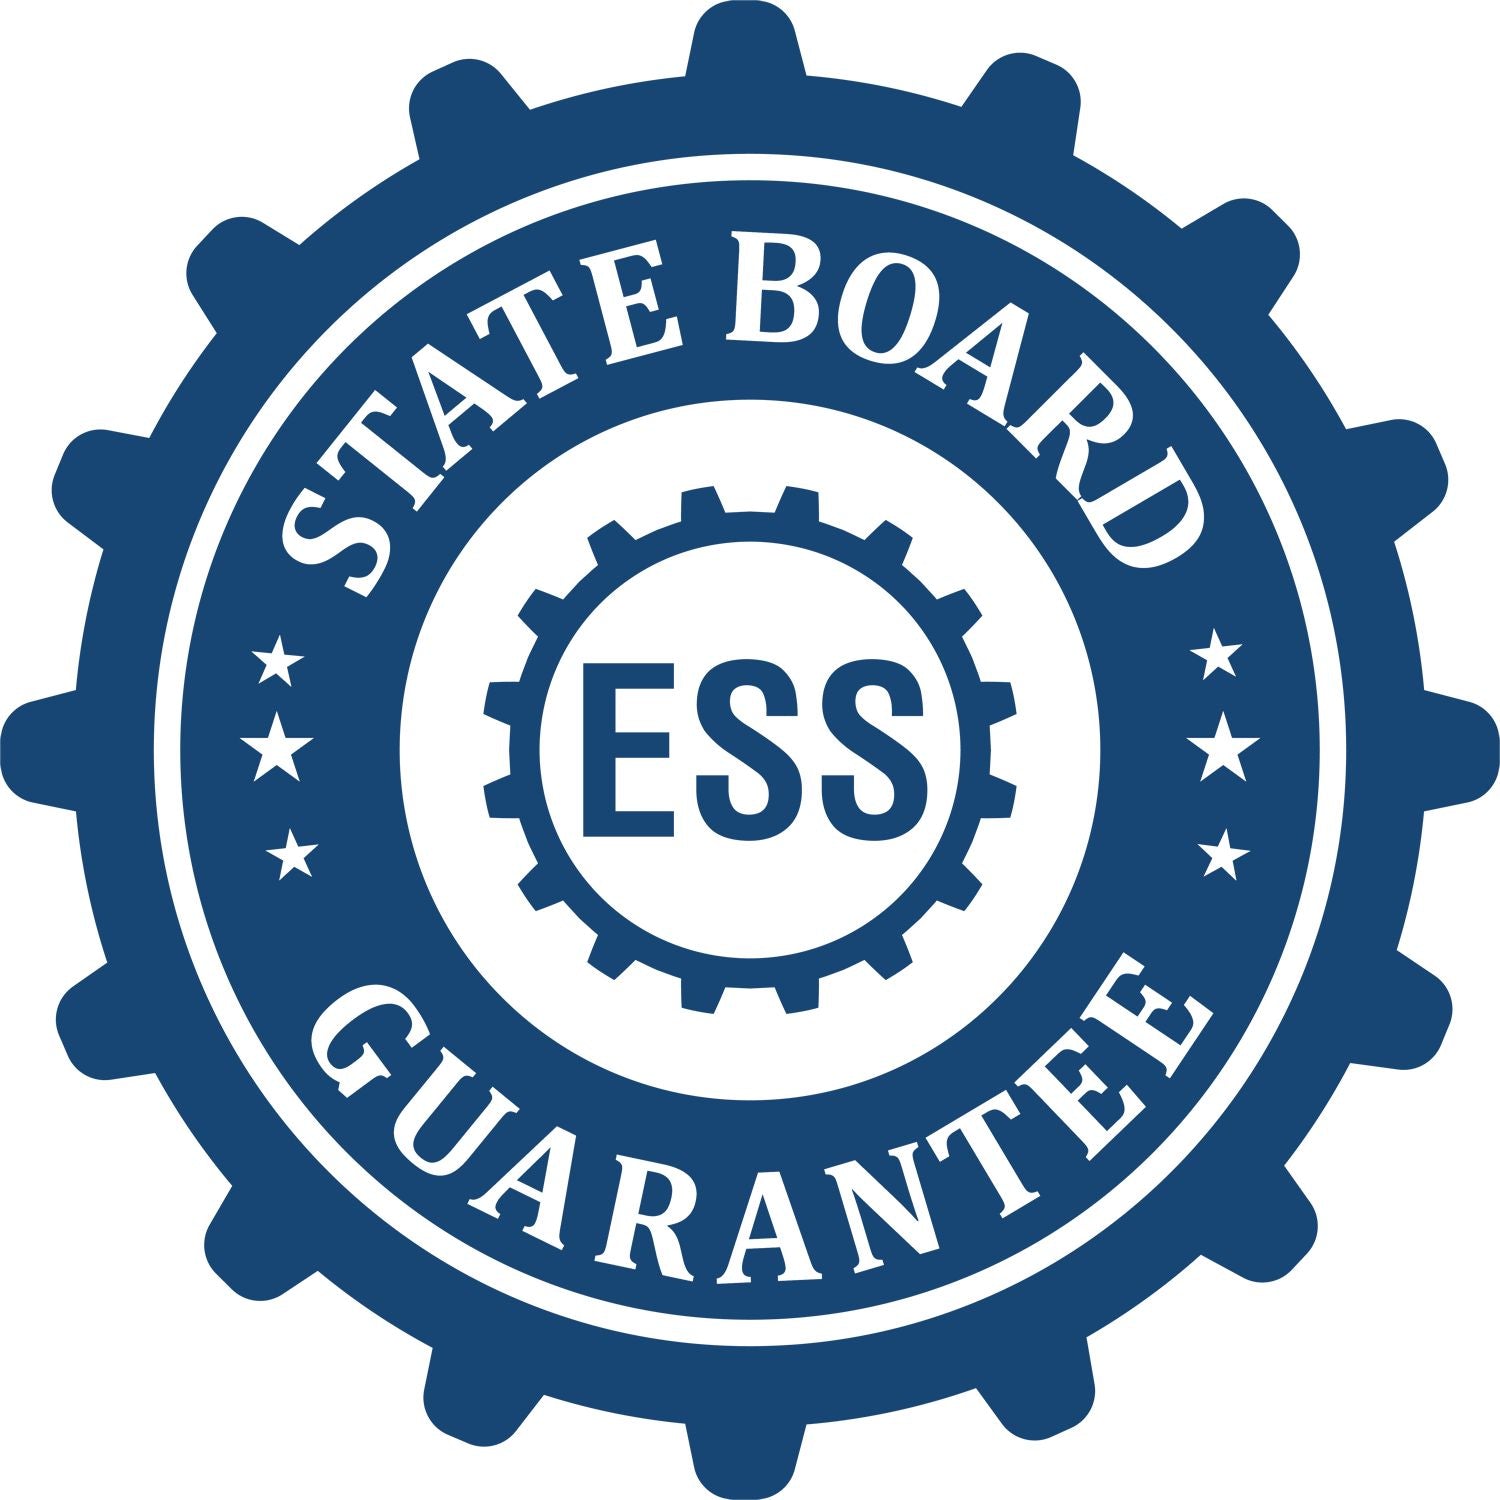 An emblem in a gear shape illustrating a state board guarantee for the Heavy Duty Cast Iron Colorado Engineer Seal Embosser product.